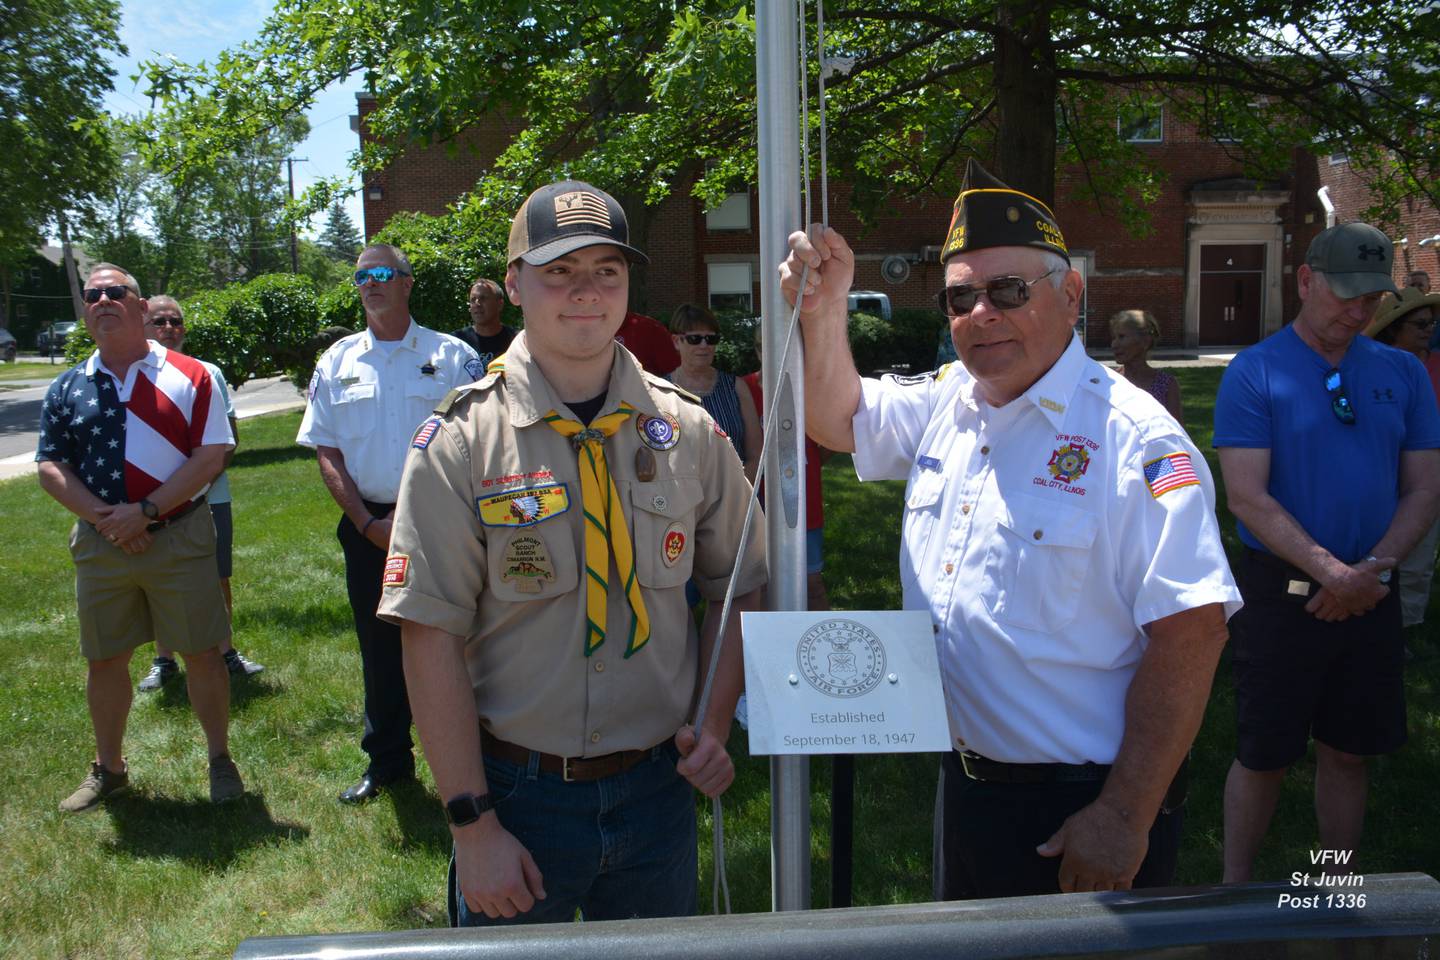 St. Juvin Post Life Member and Air Force Vet Mike Lareau (right) and grandson Life Scout Ethan Bach prepare to raise the Air Force service flag to full staff.